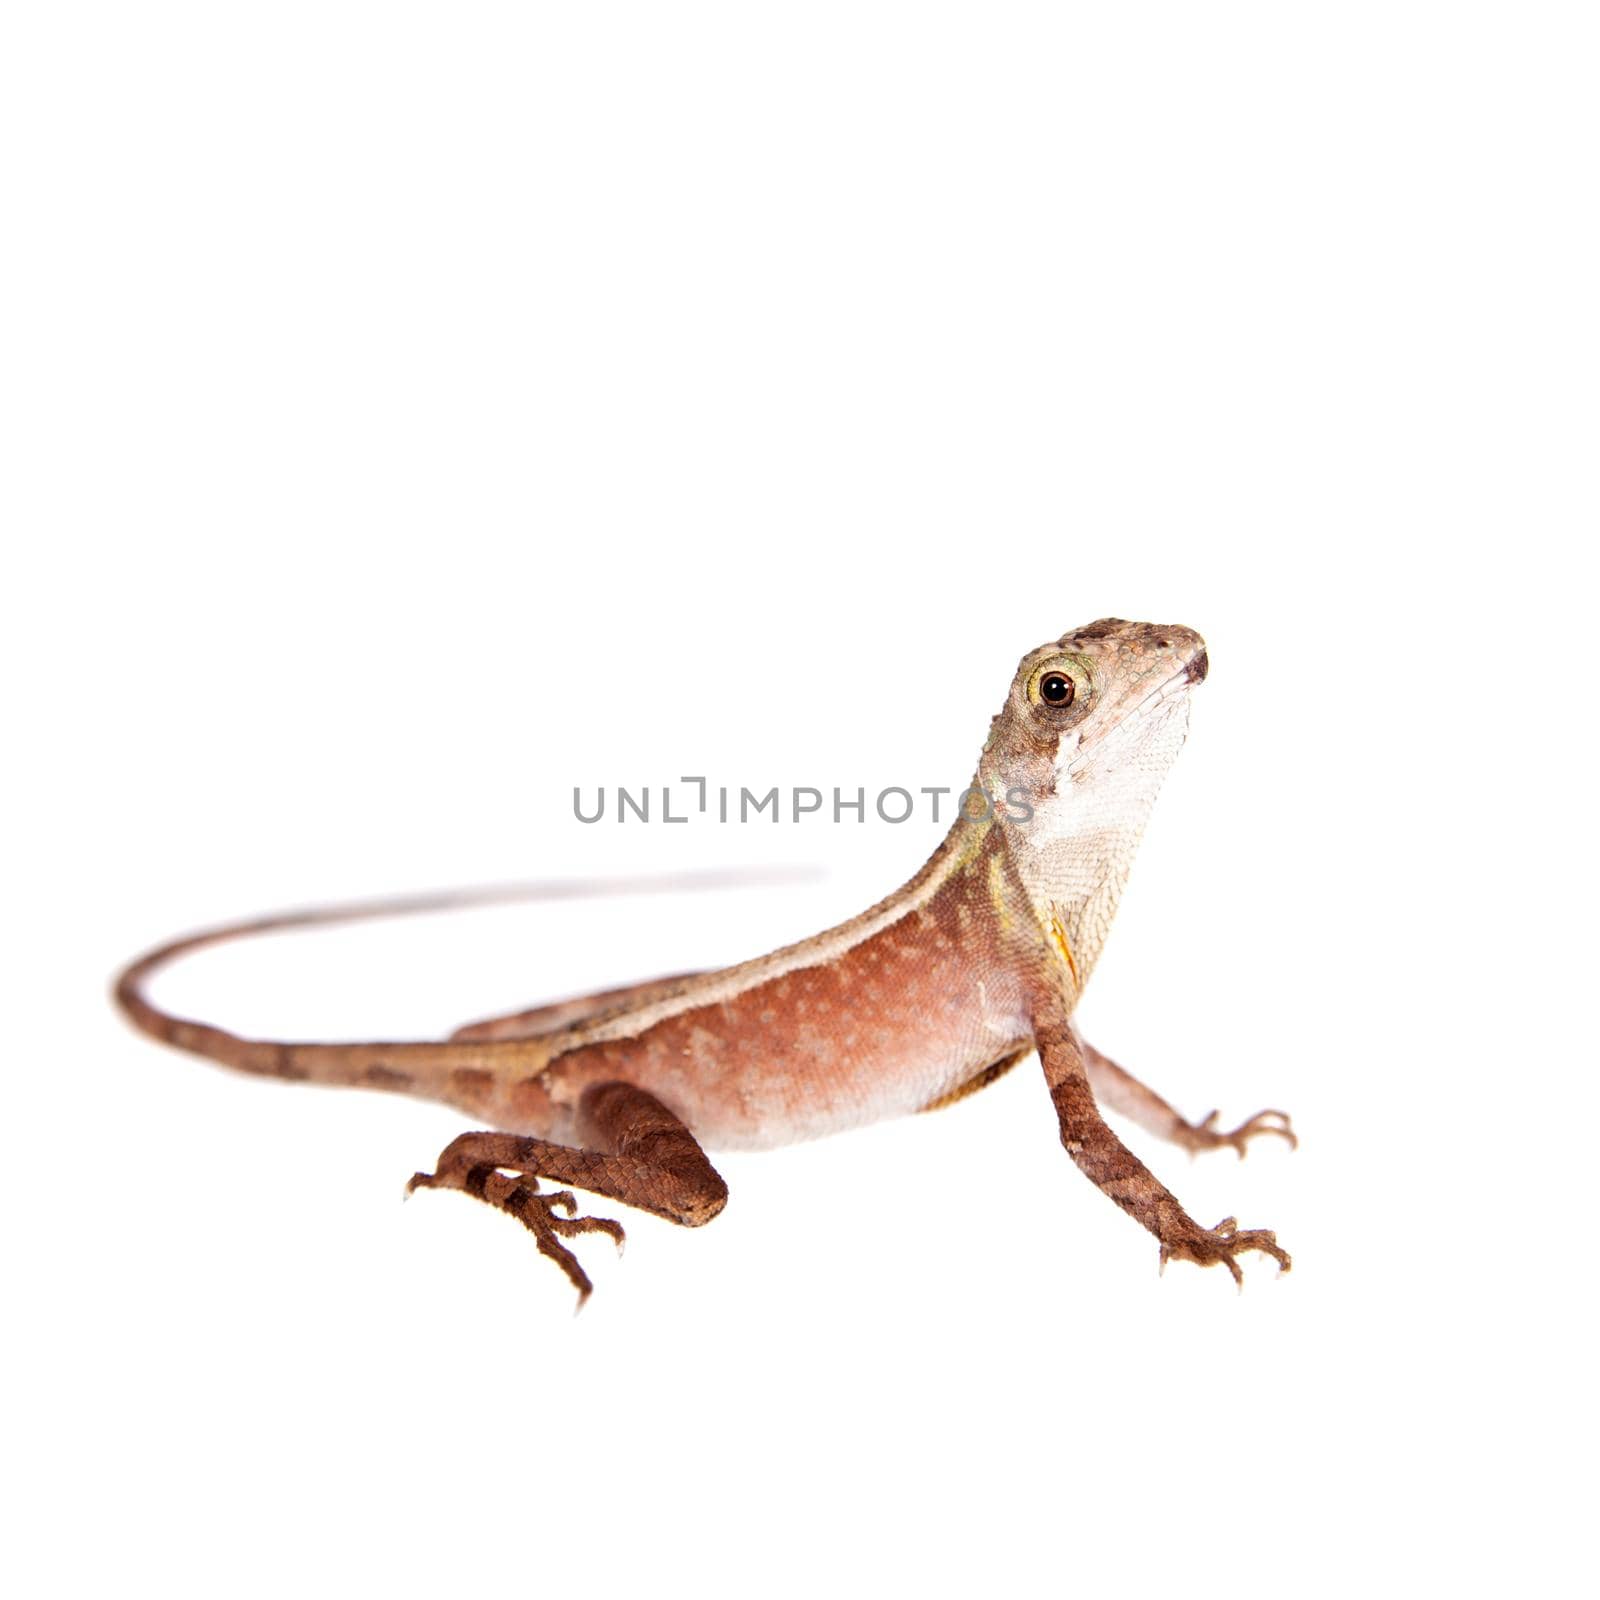 The Brown-patched Kangaroo lizard on white by RosaJay